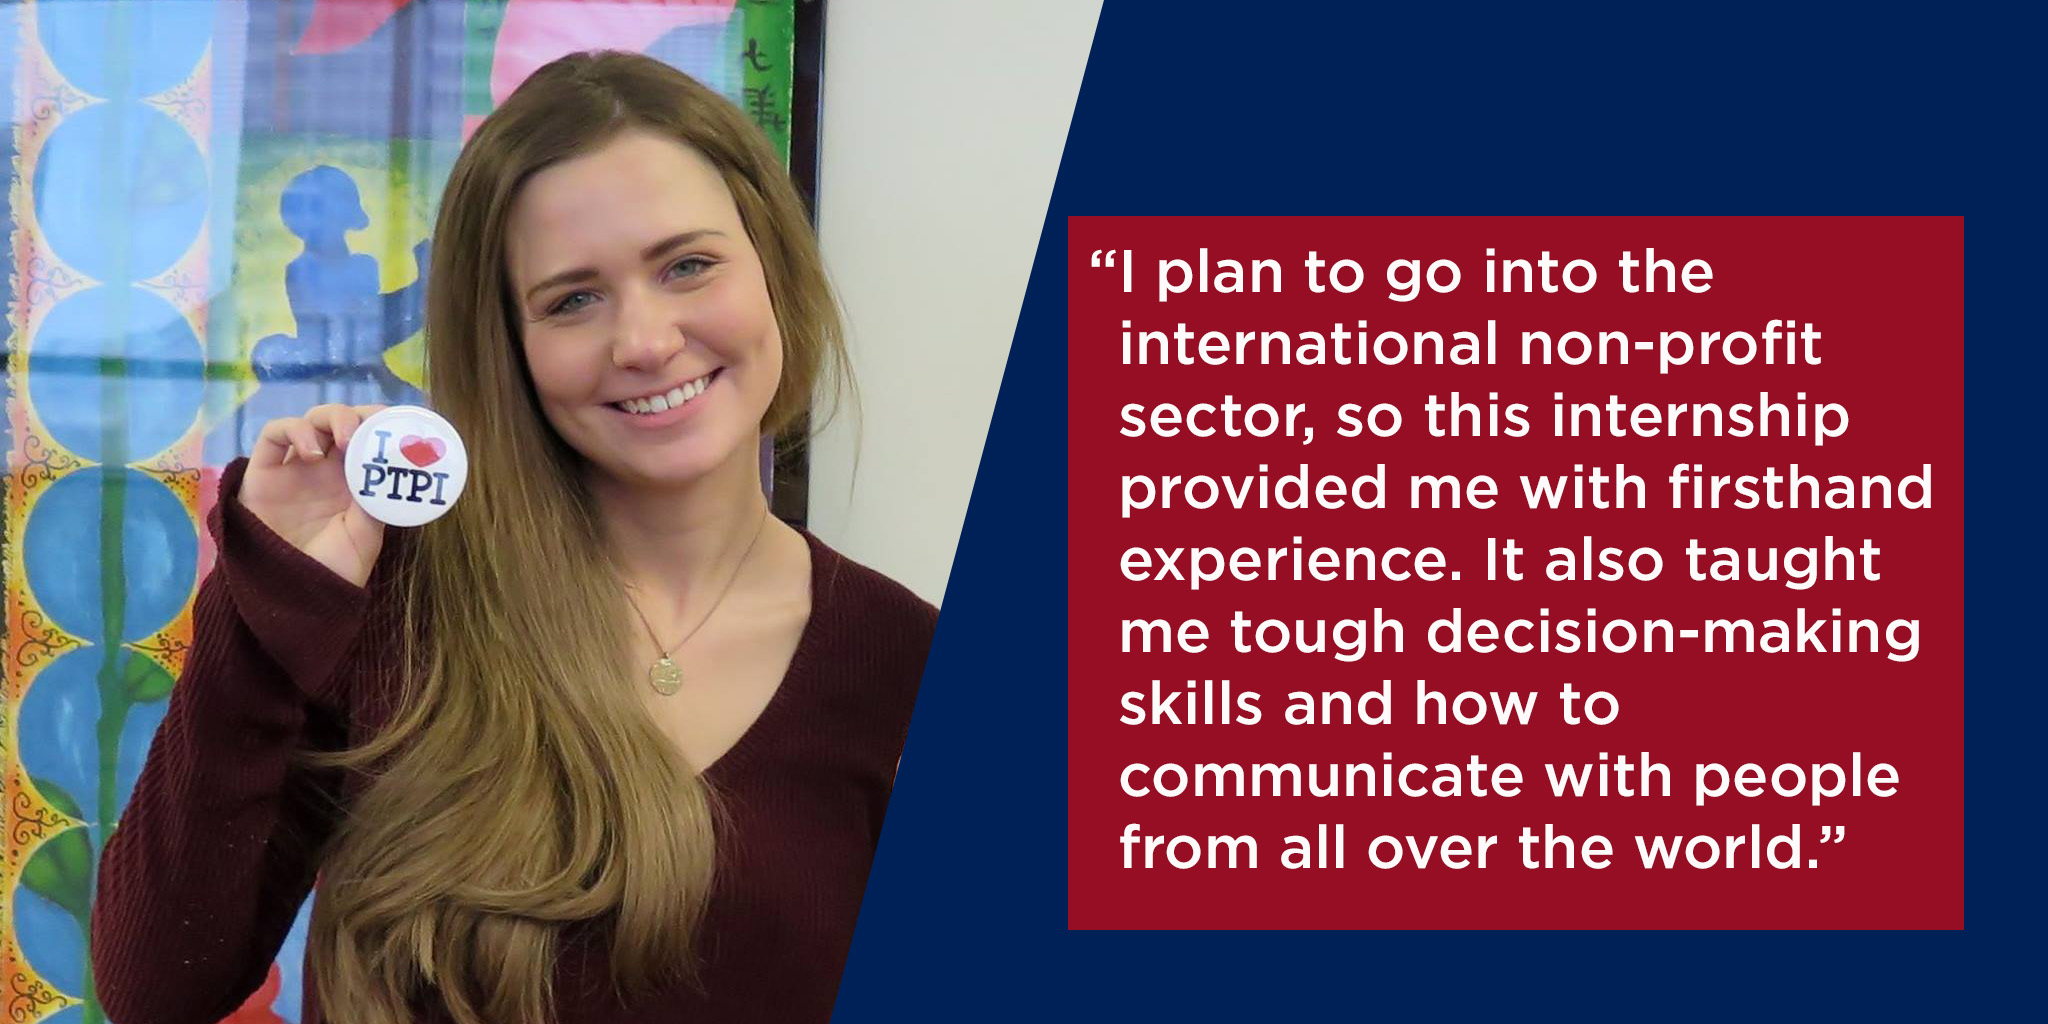 "This internship also taught me tough decision-making skills, through the process of the Scholarship and Grant programs, and how to communicate with people from all over the world."